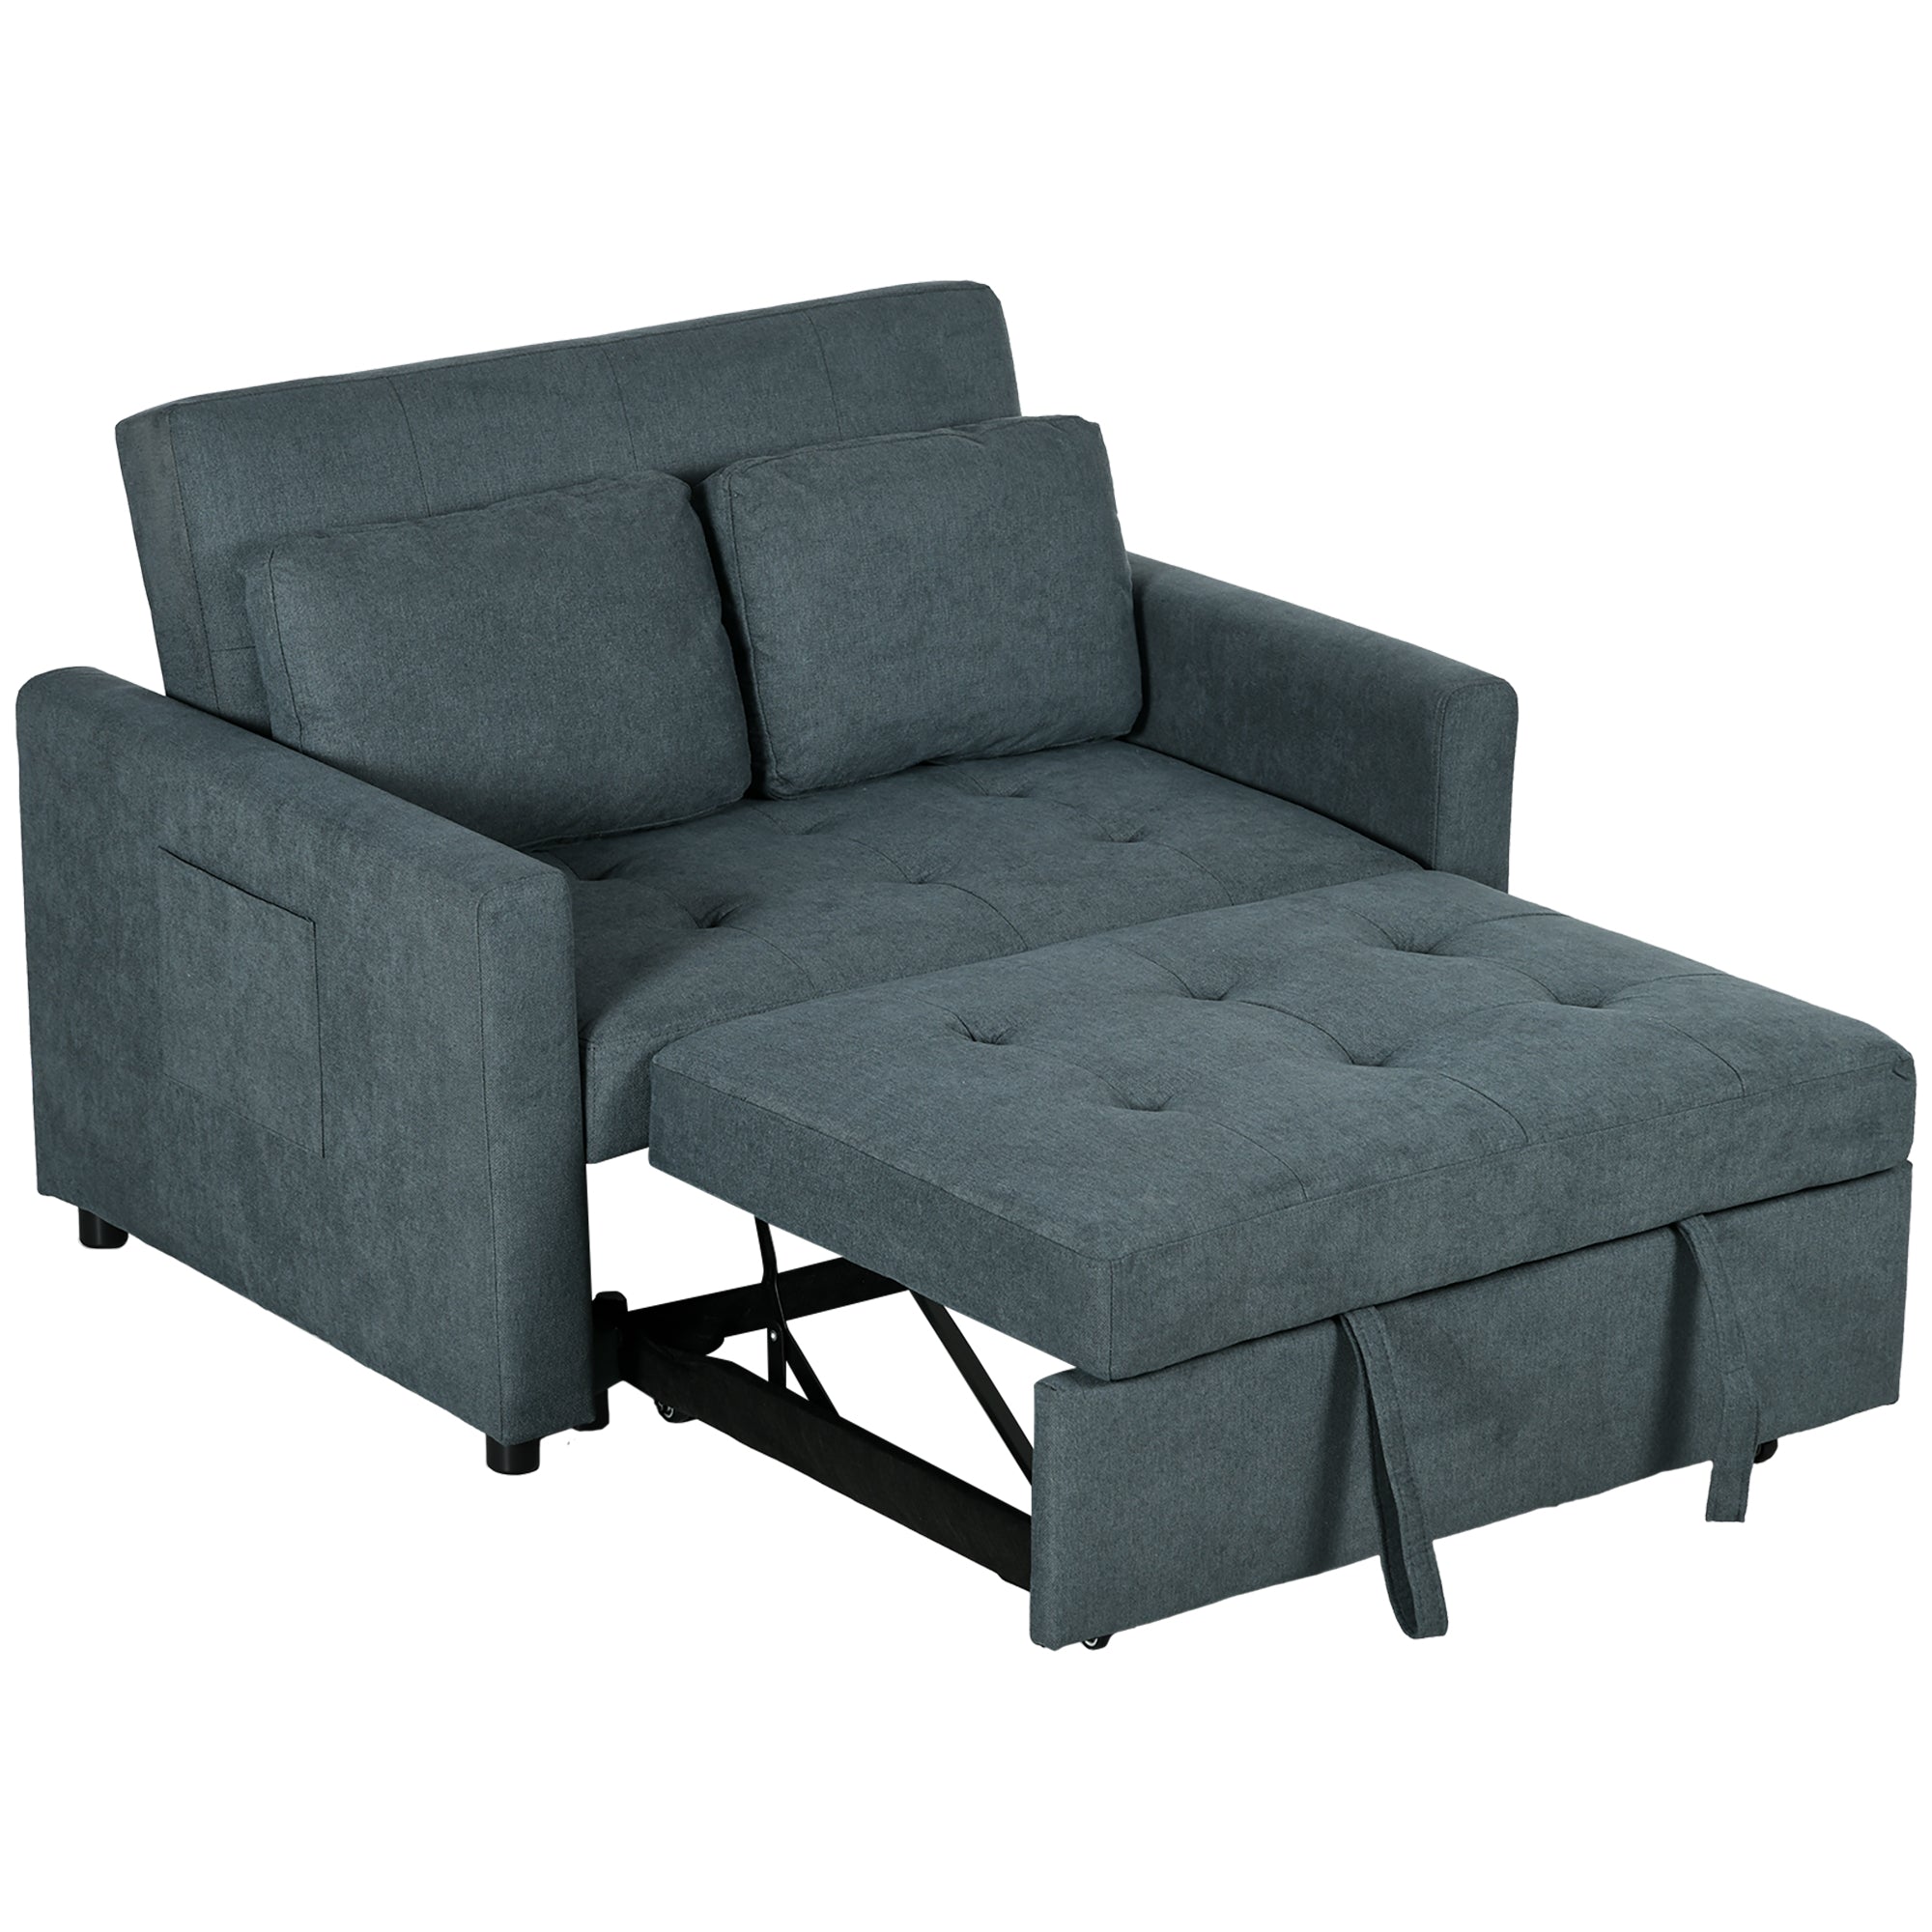 Loveseat Sofa Bed, Convertible Bed Settee with 2 Cushions, Side Pockets for Living Room, Charcoal Grey-0